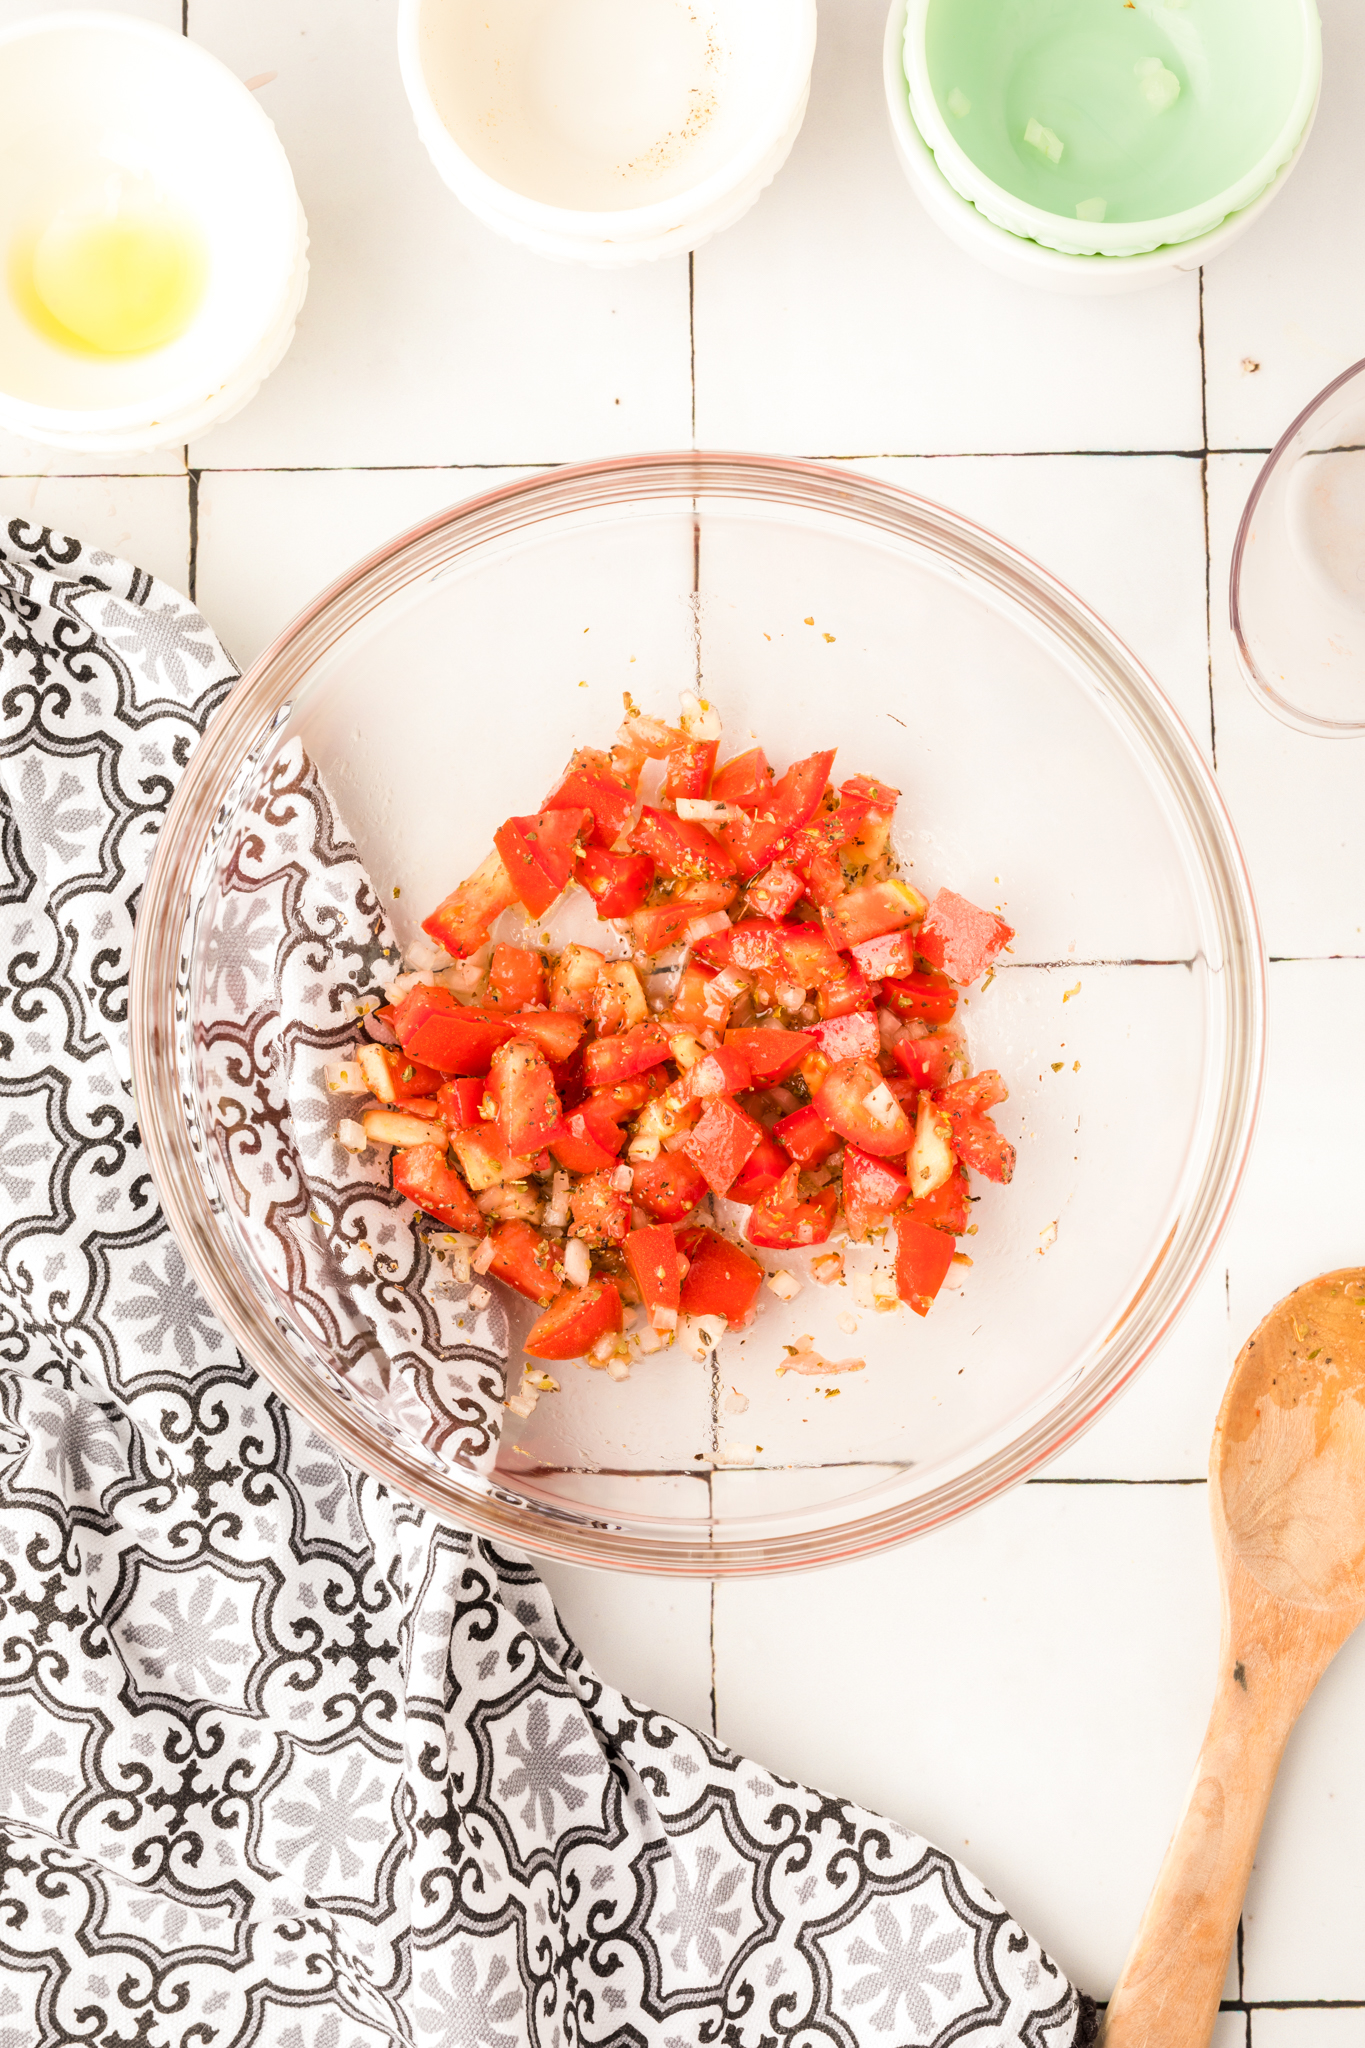 A photo of tomato relish in a bowl